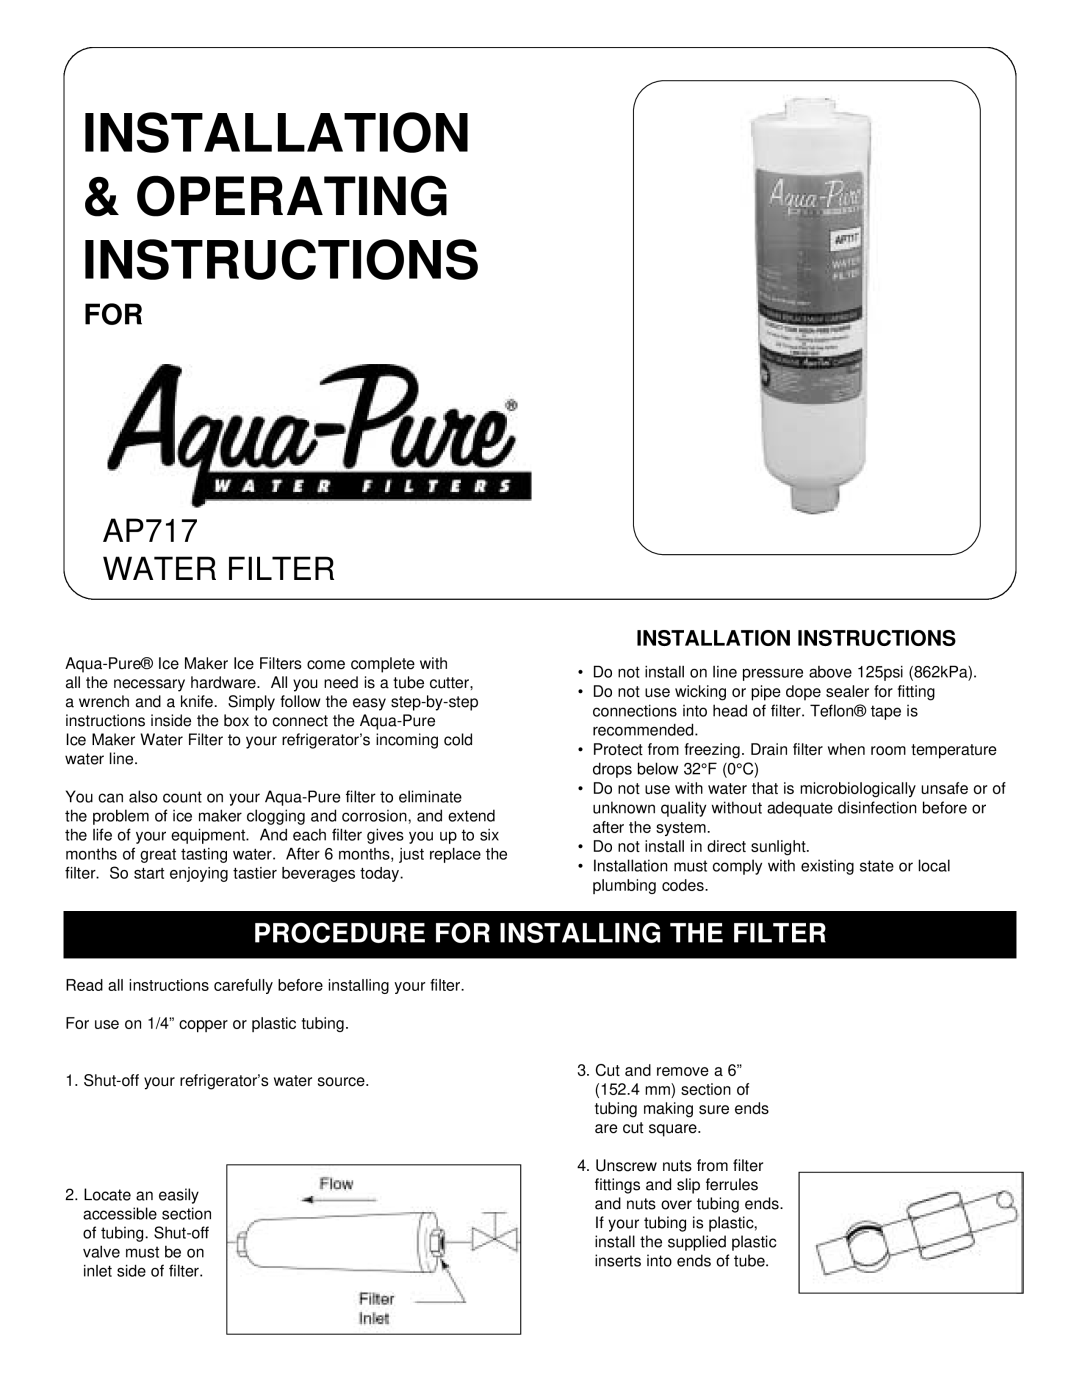 Cuno manual Installation Instructions, Installation Operating Instructions, AP717 WATER FILTER 